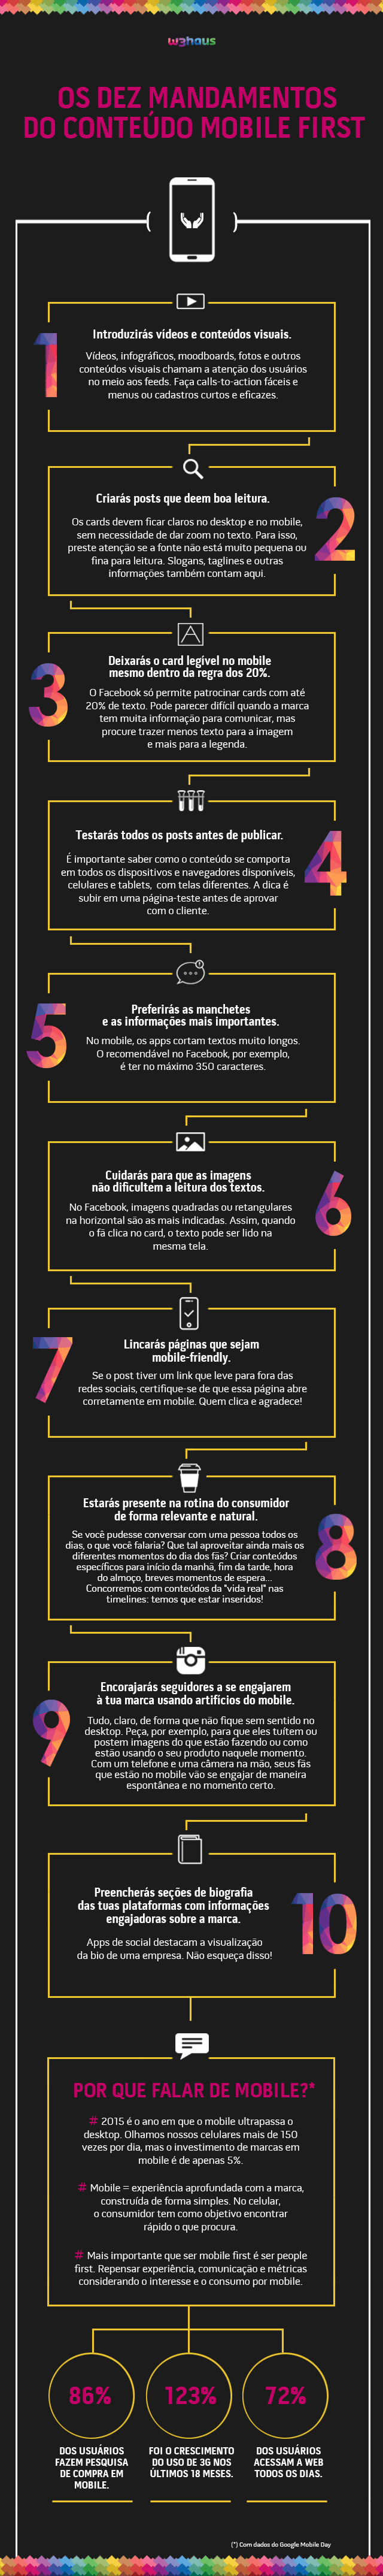 infografico-mobile-first